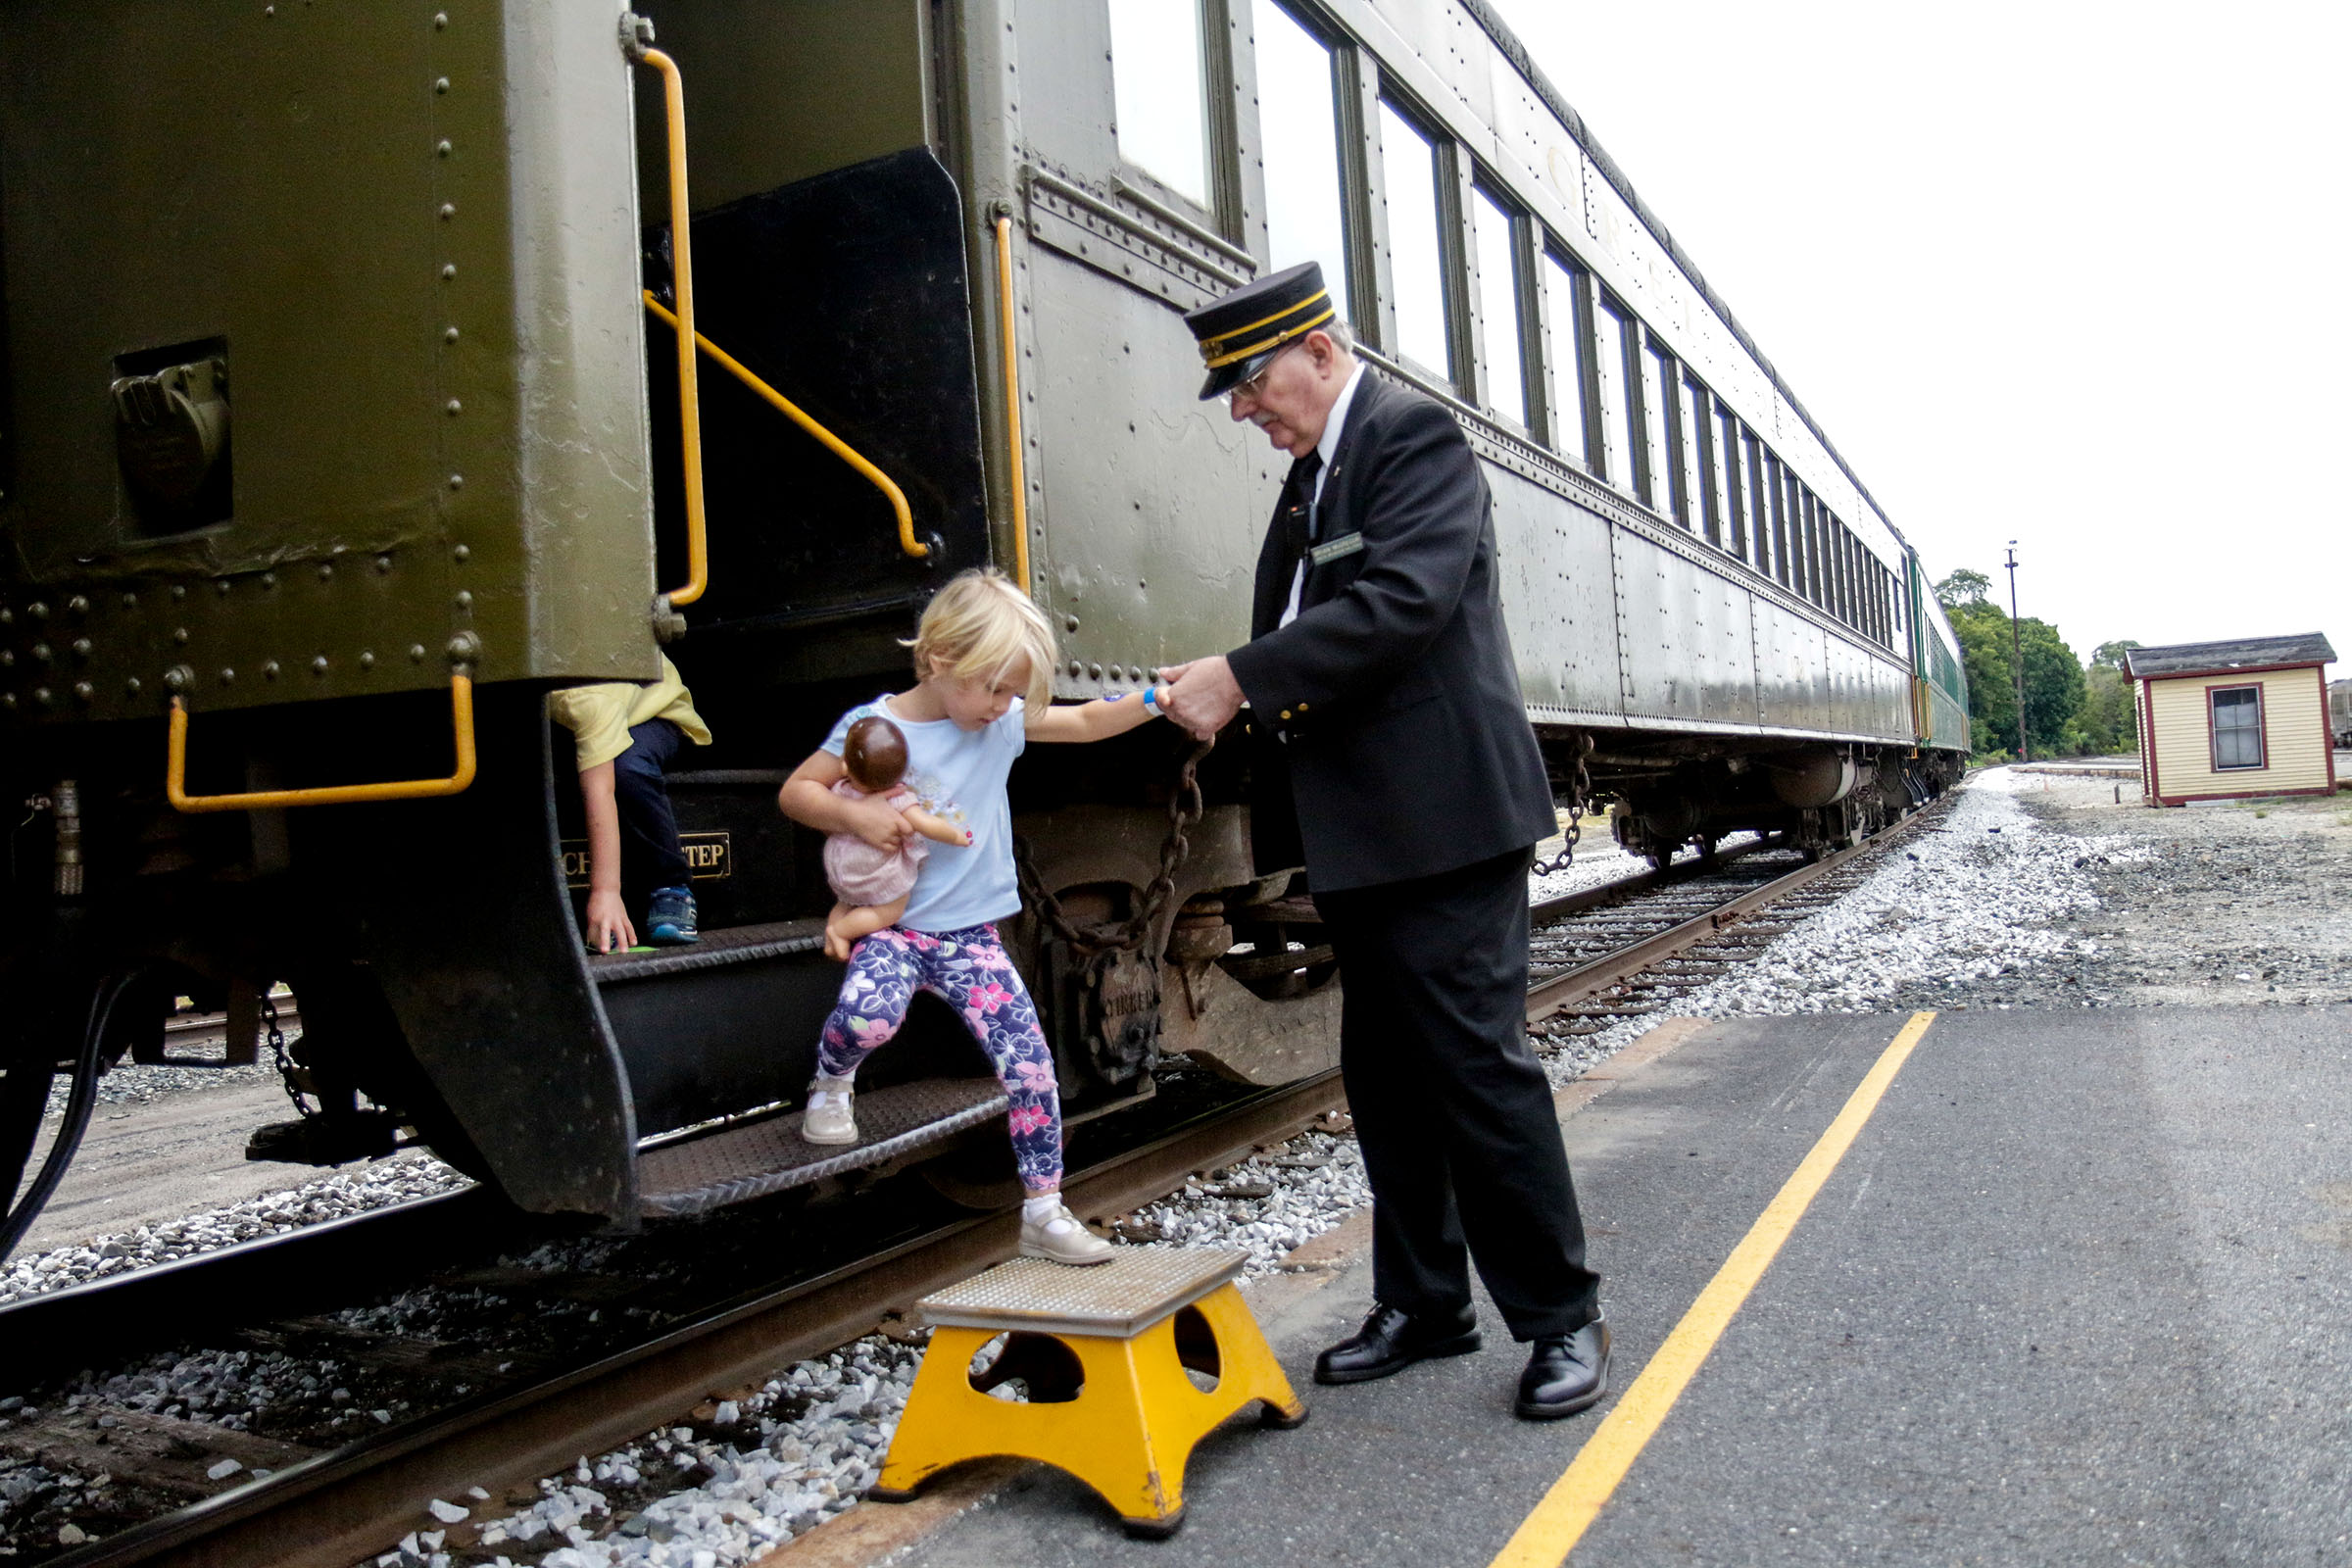  Brian McGregor, the passenger representative of Green Mountain Railroad, helps Nicole Piasecki, 3, of Hanover, N.H., off the train at the end of her 40 minute train ride at Glory Days of the Railroad in White River Junction, Vt., on Saturday, Sept. 